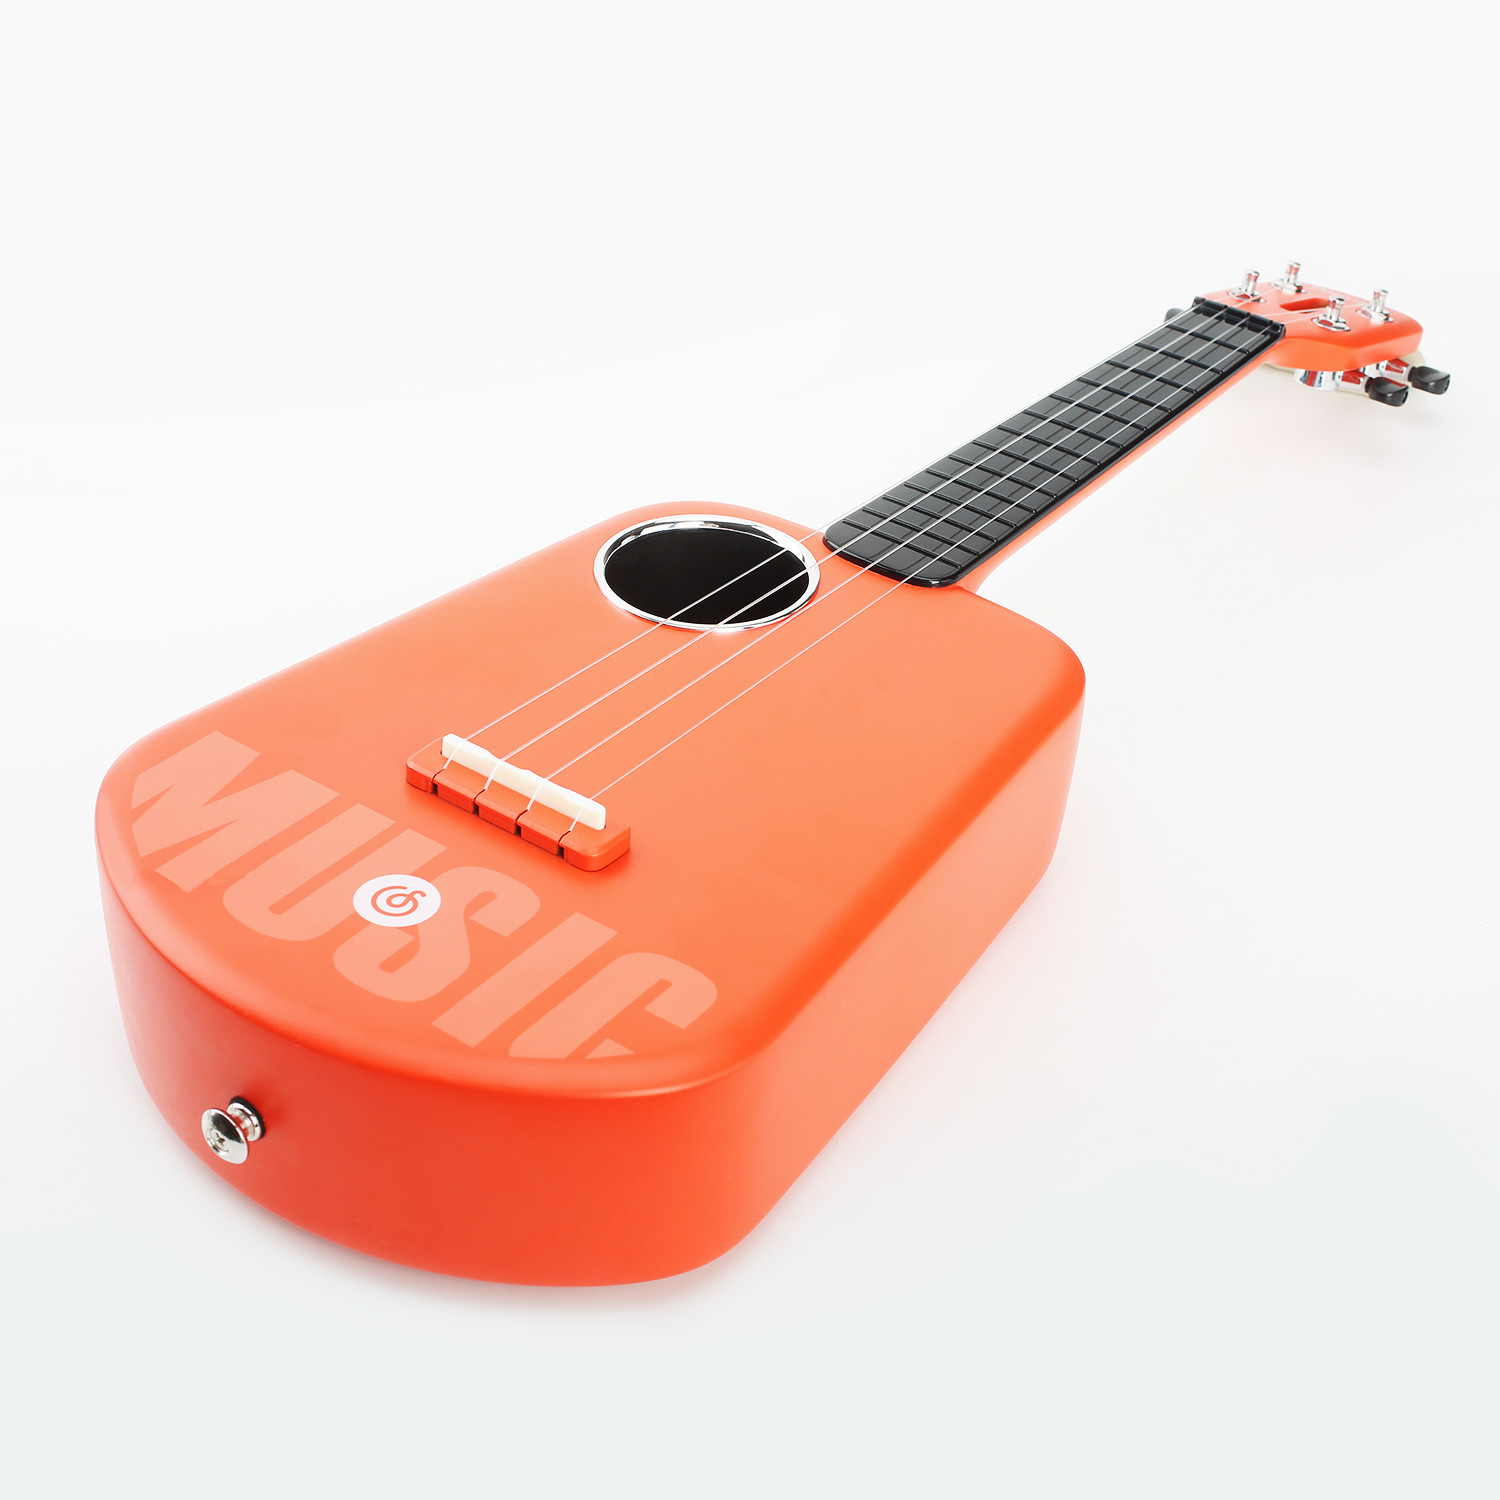  PopuMusic Populele 2 Compact and Portable Smart Ukulele Carbon  Fiber Edition for Beginners, Experts, Kids and Adults : Musical Instruments